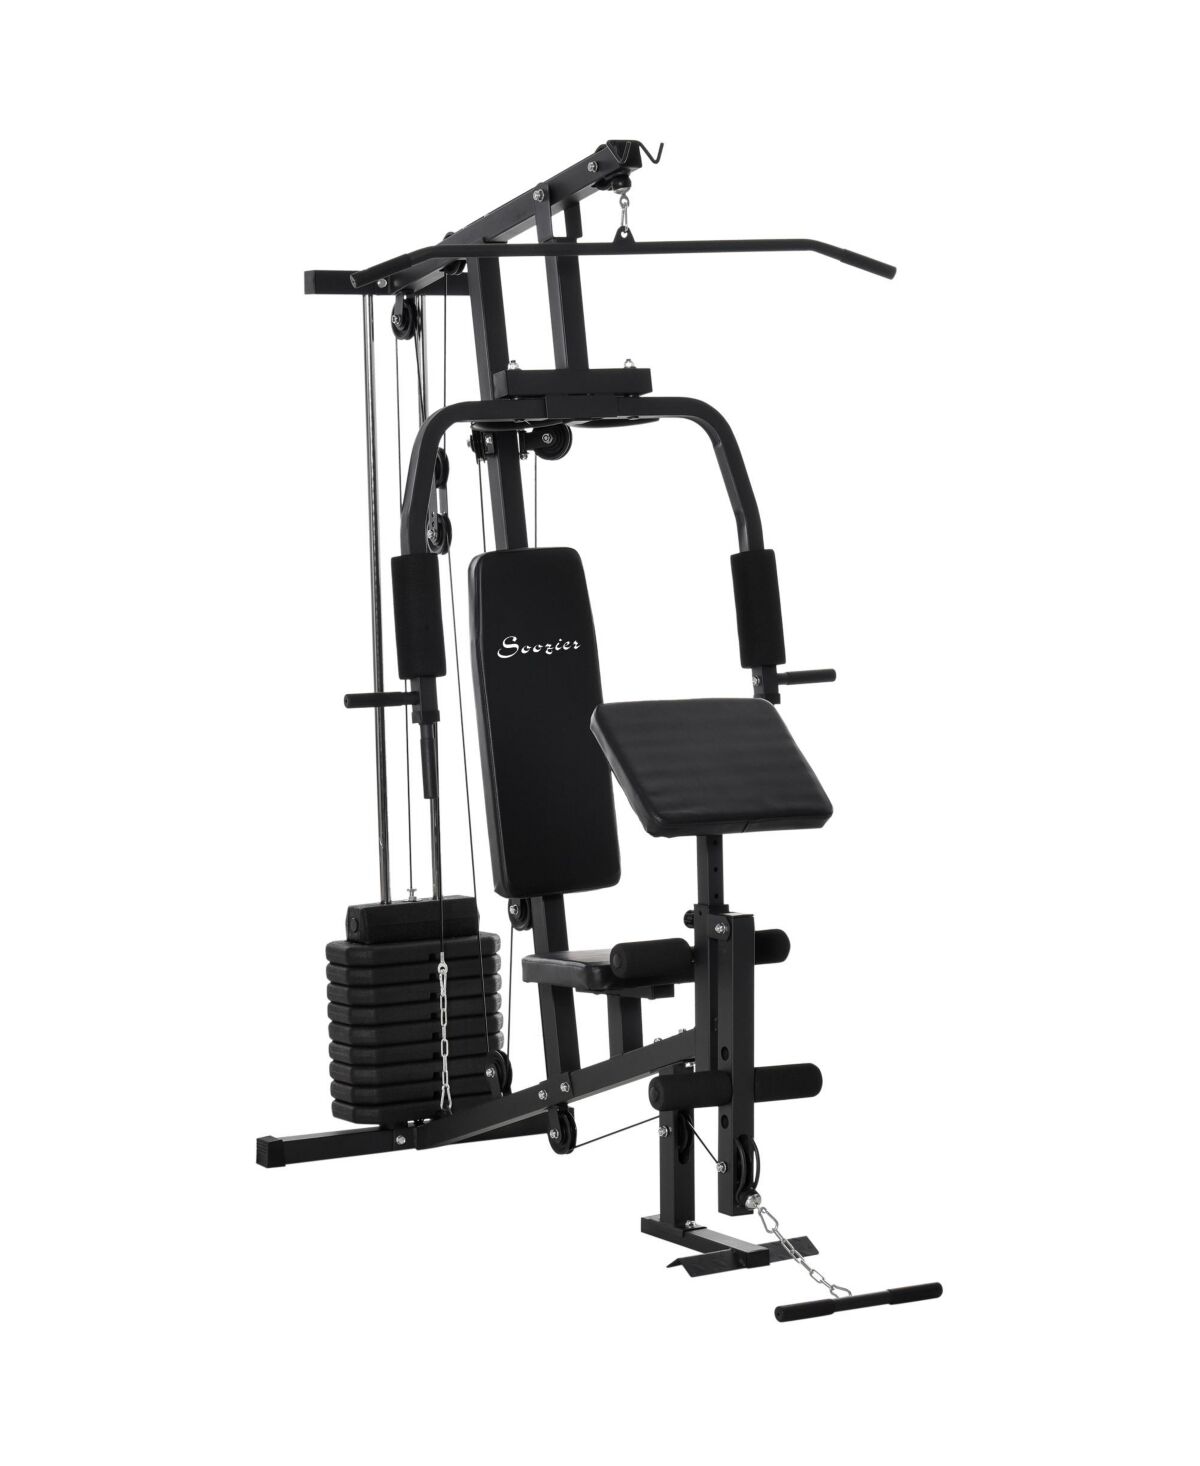 Soozier Multifunction Home Gym Station w/ Pull-up Stand, Dip Station, Weight Stack Machine for Full Body Workout - Black